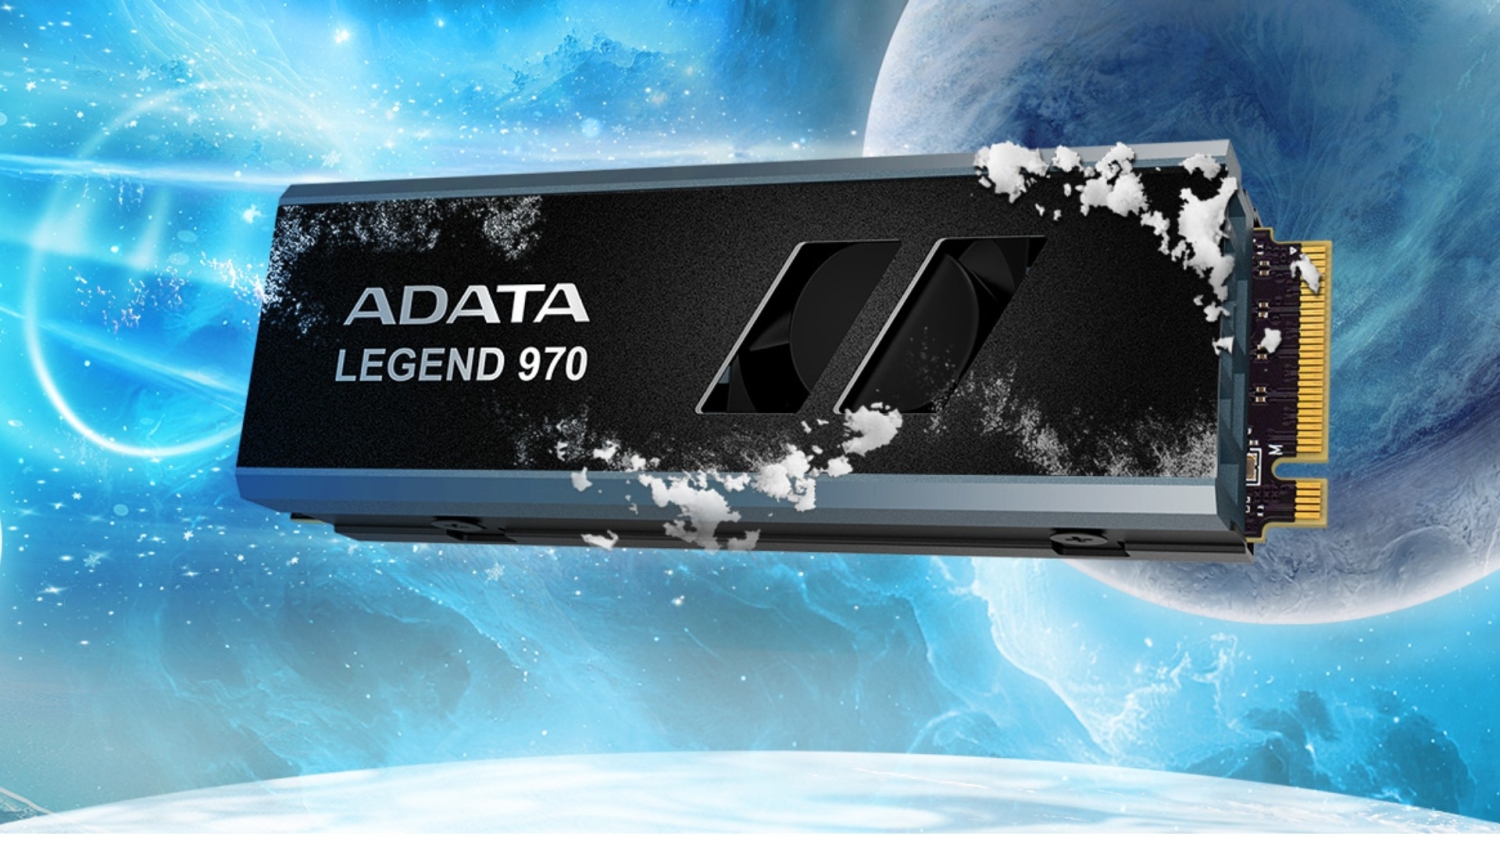 Adata Launches Legend Pcie Gen Ssd With Custom Active Cooling To 22976 Hot Sex Picture 2758